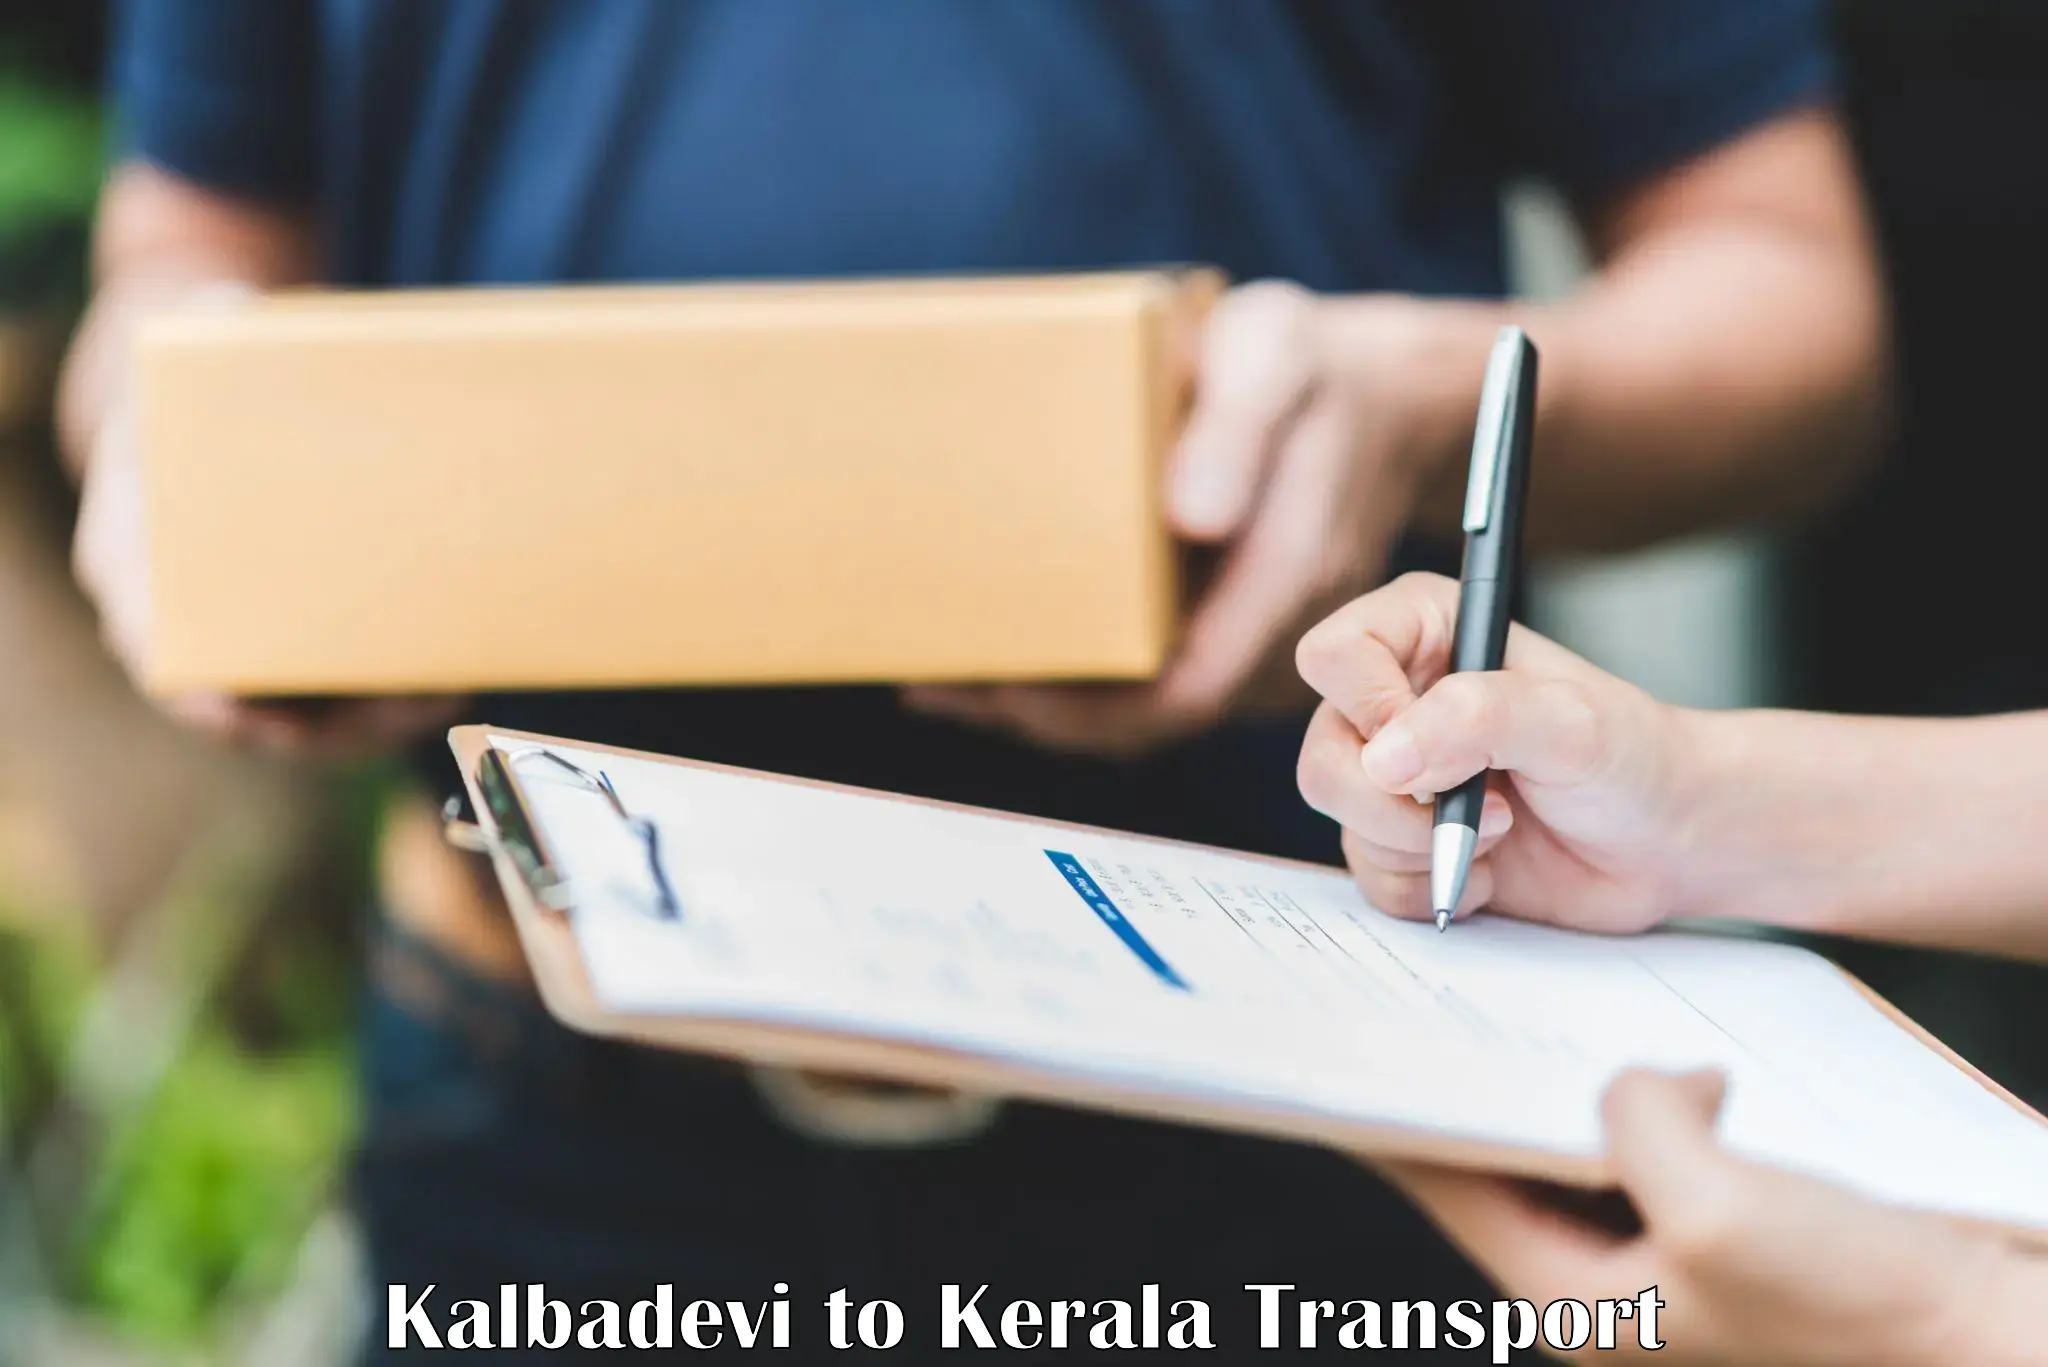 Online transport service Kalbadevi to Cochin University of Science and Technology